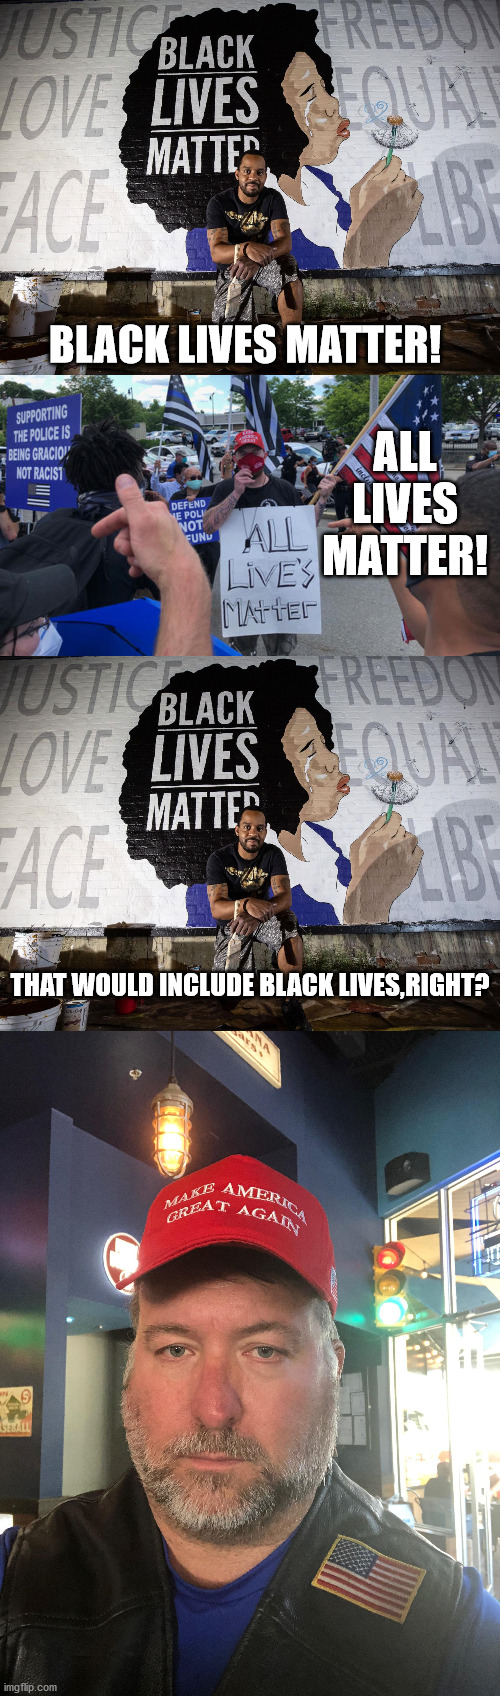 When you say all lives matter, you're confirming that black lives matter. | BLACK LIVES MATTER! ALL LIVES MATTER! THAT WOULD INCLUDE BLACK LIVES,RIGHT? | image tagged in black lives matter,racism,protests | made w/ Imgflip meme maker